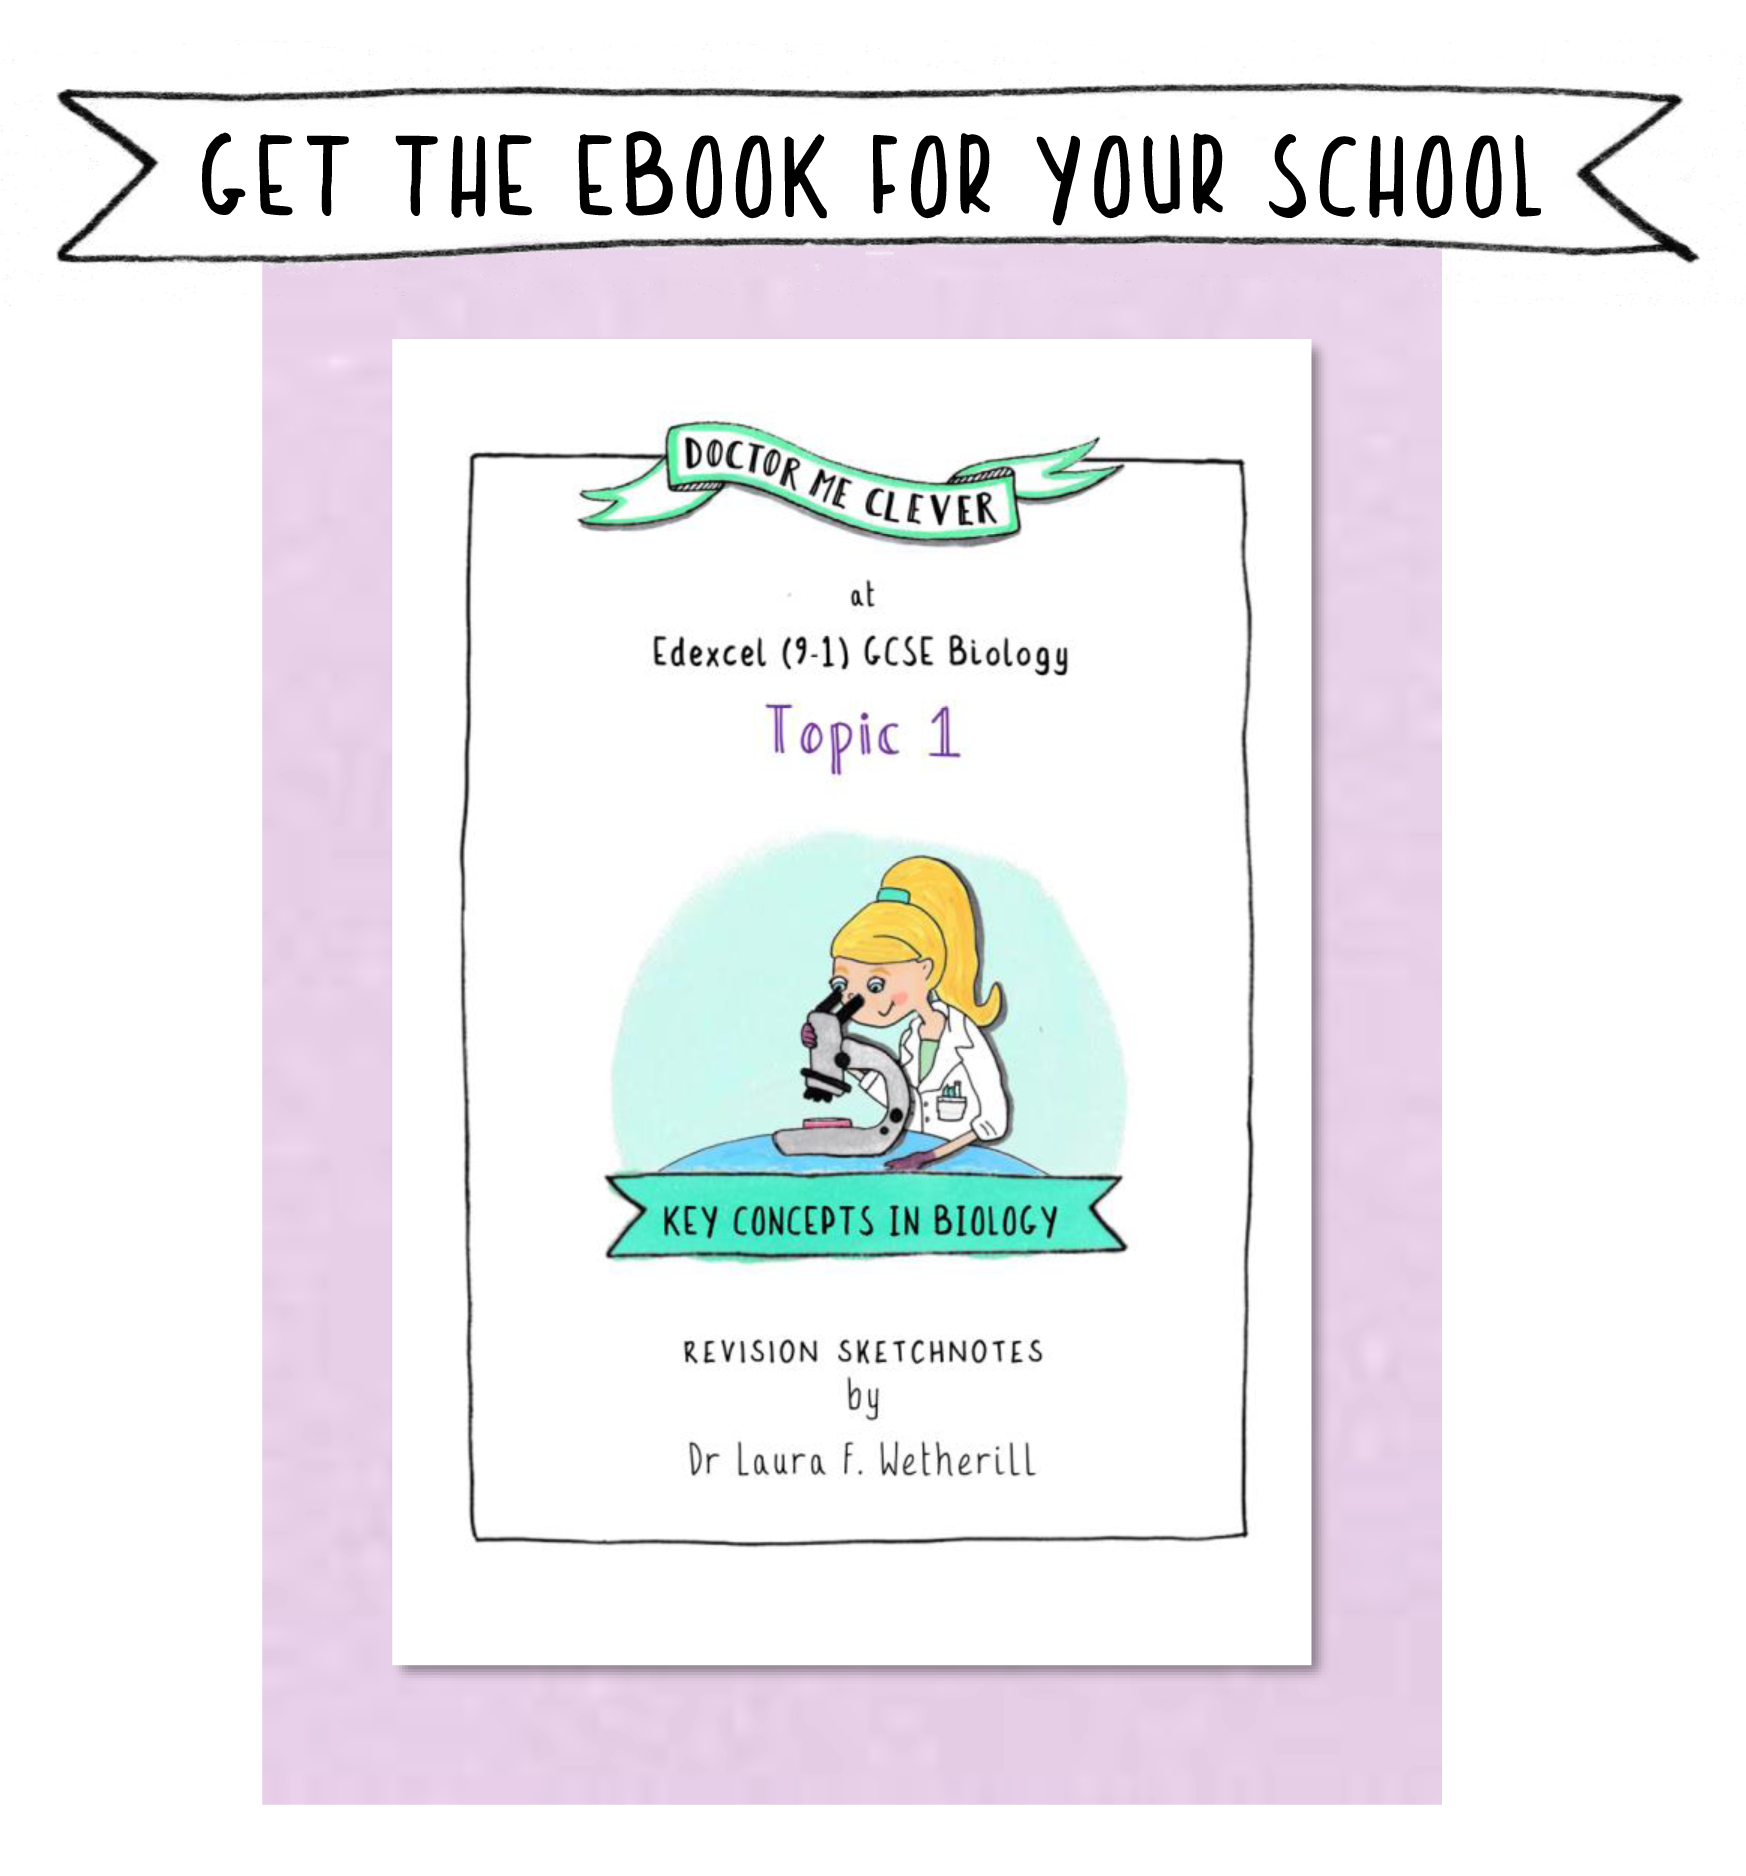 Get the eBook for your school